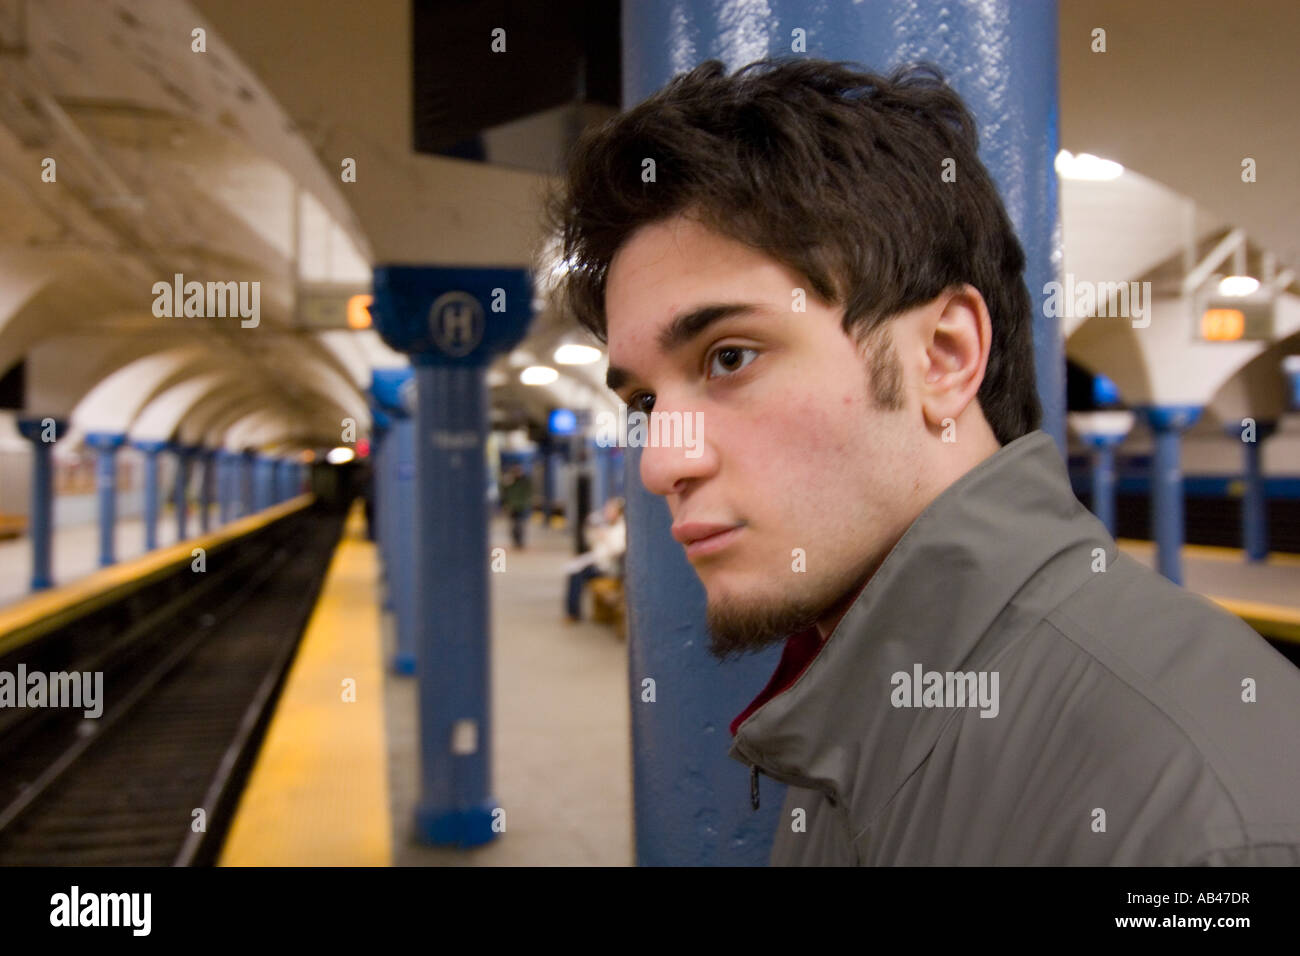 A young man waiting for a subway in a subway station Stock Photo